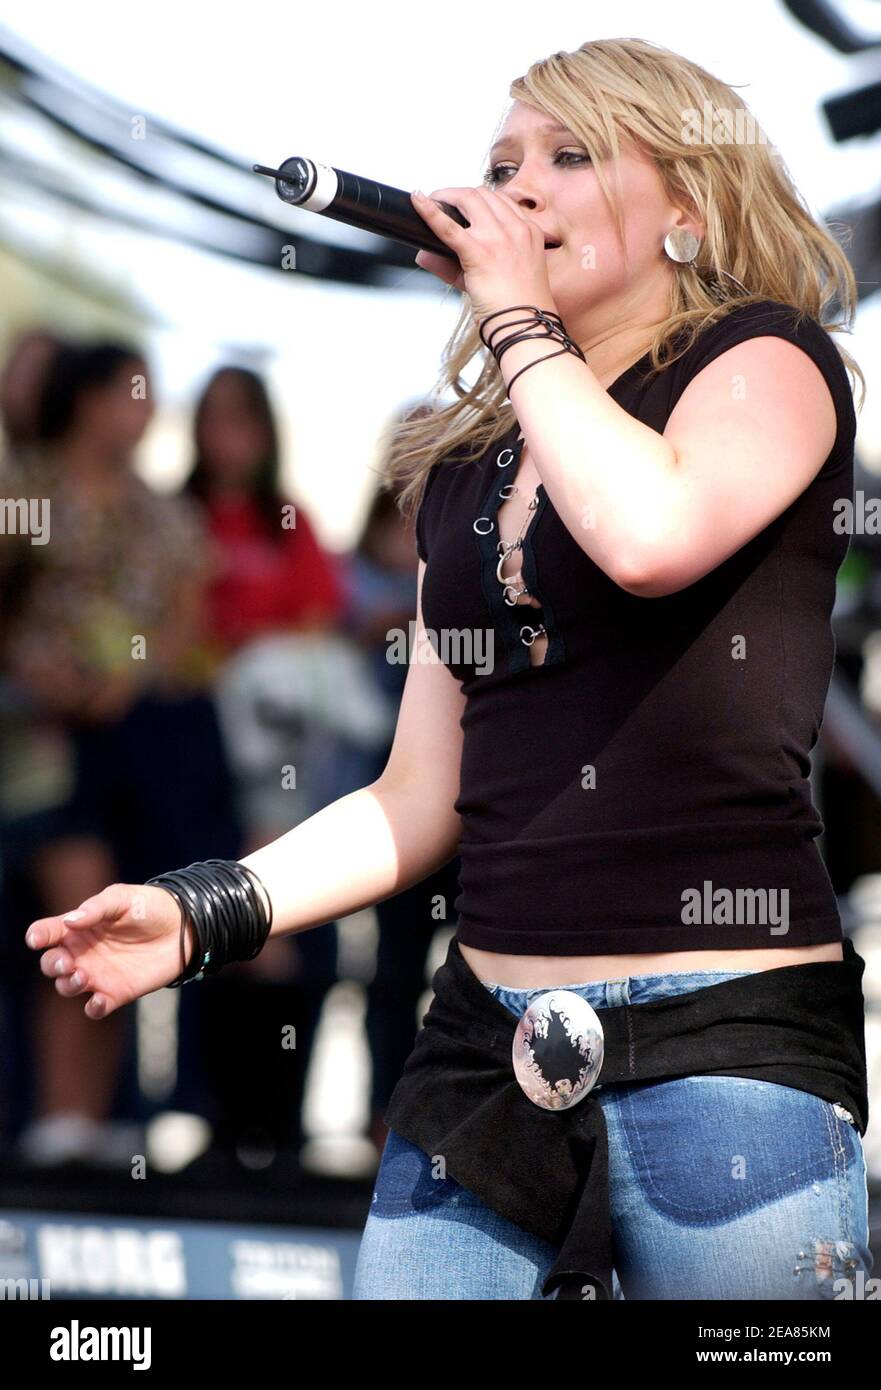 Hilary Duff performing at 102.7 KIIS FM's Wango Tango On-Air Concert 2004. Event held at the Rose Bowl in Pasadena CA on May 15, 2004. (Pictured: Hilary Duff) Photo by: Tim Mosenfelder/ABACA Stock Photo